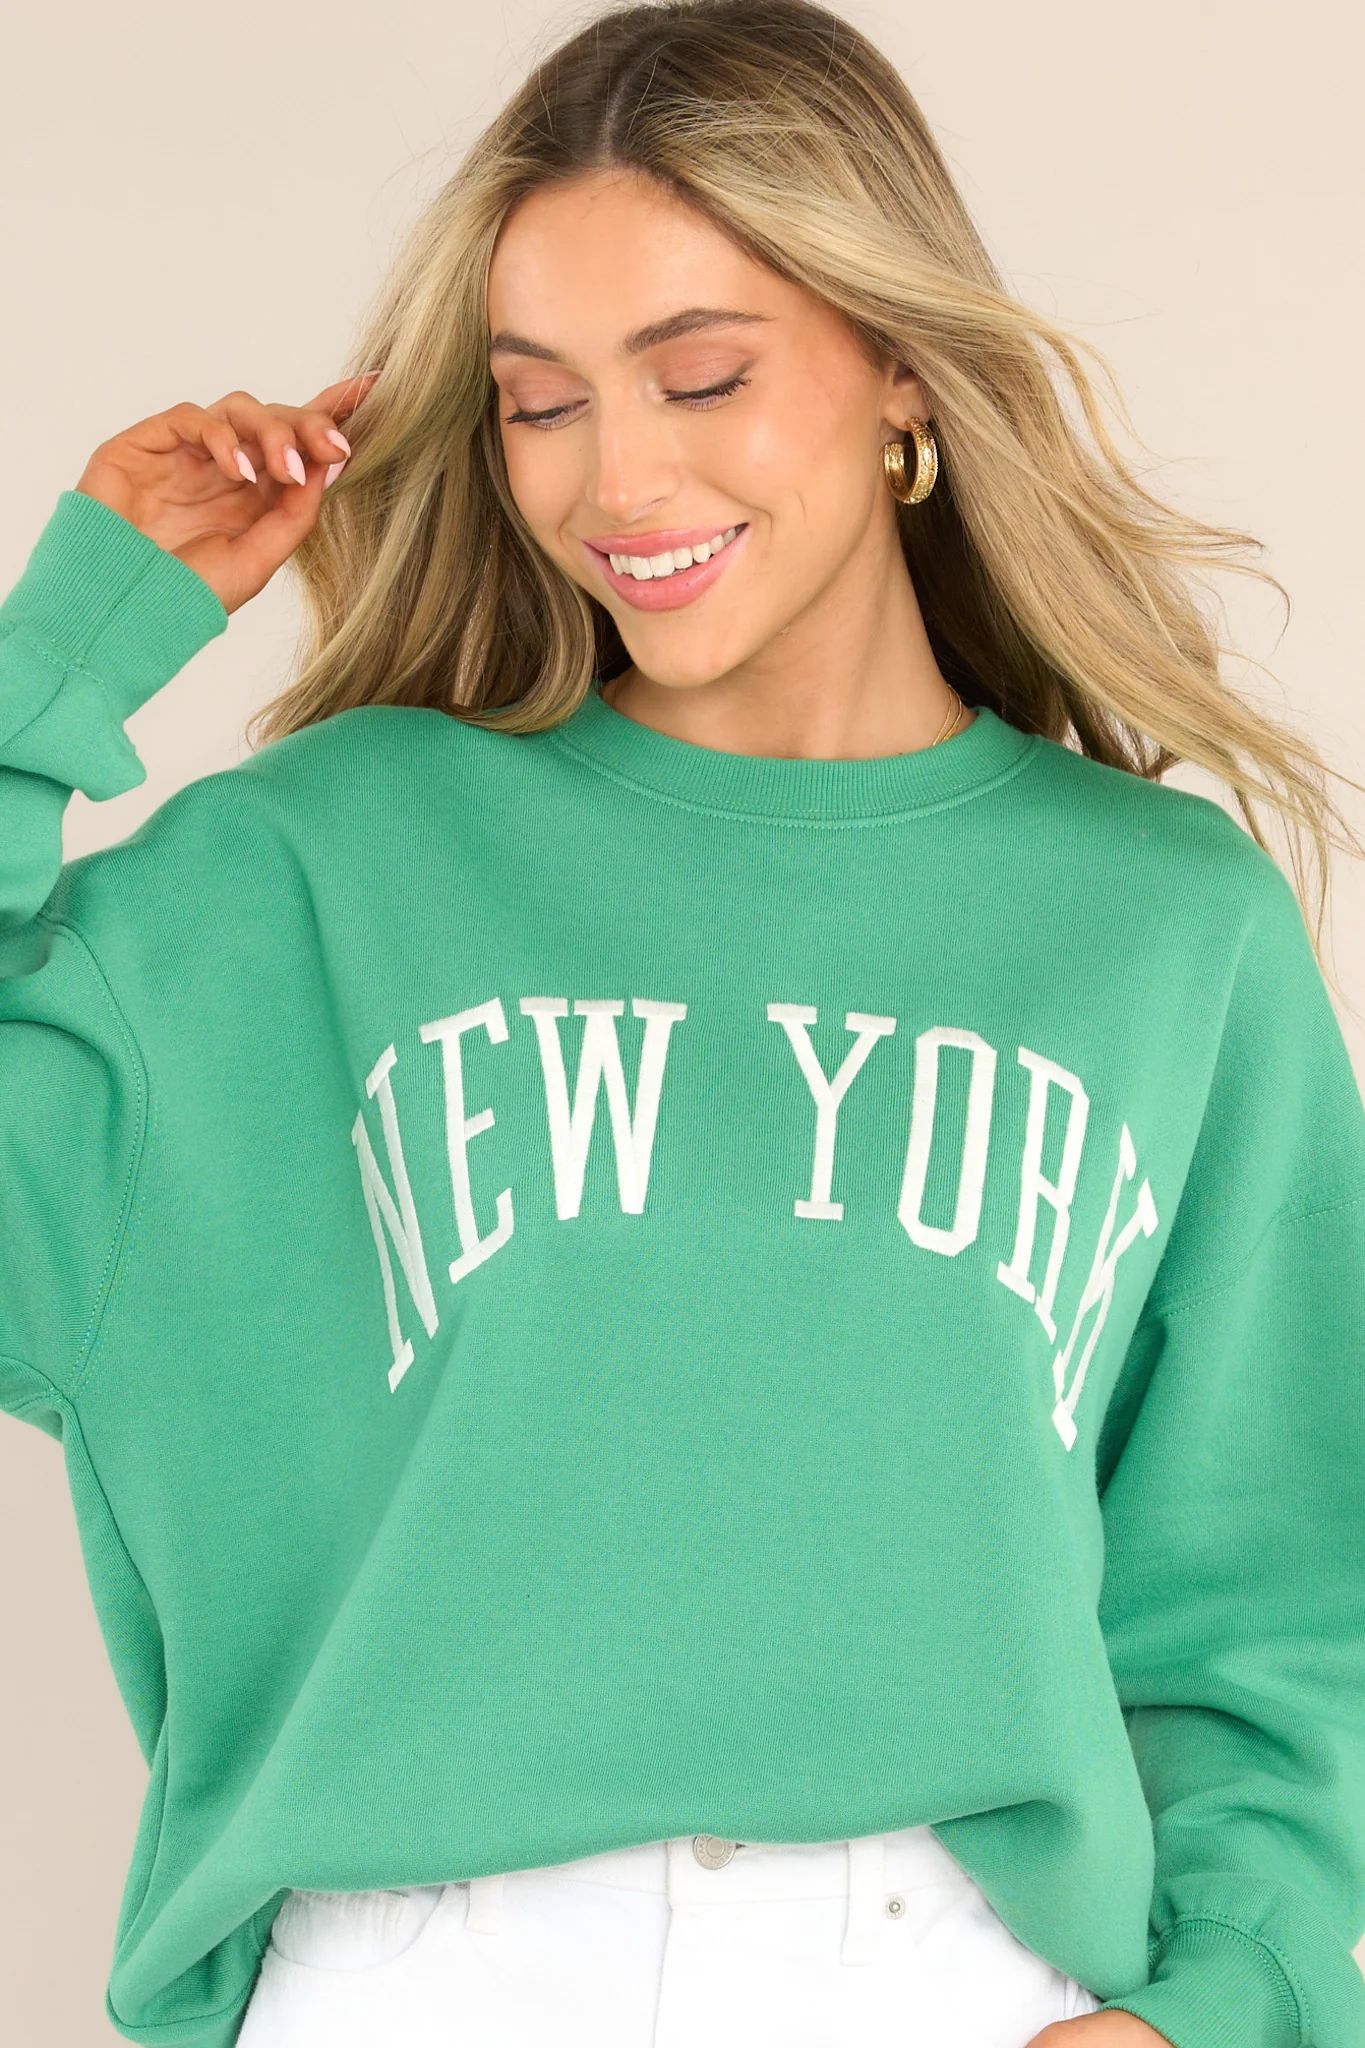 Concrete Jungle Green Embroidered Sweatshirt | Red Dress 